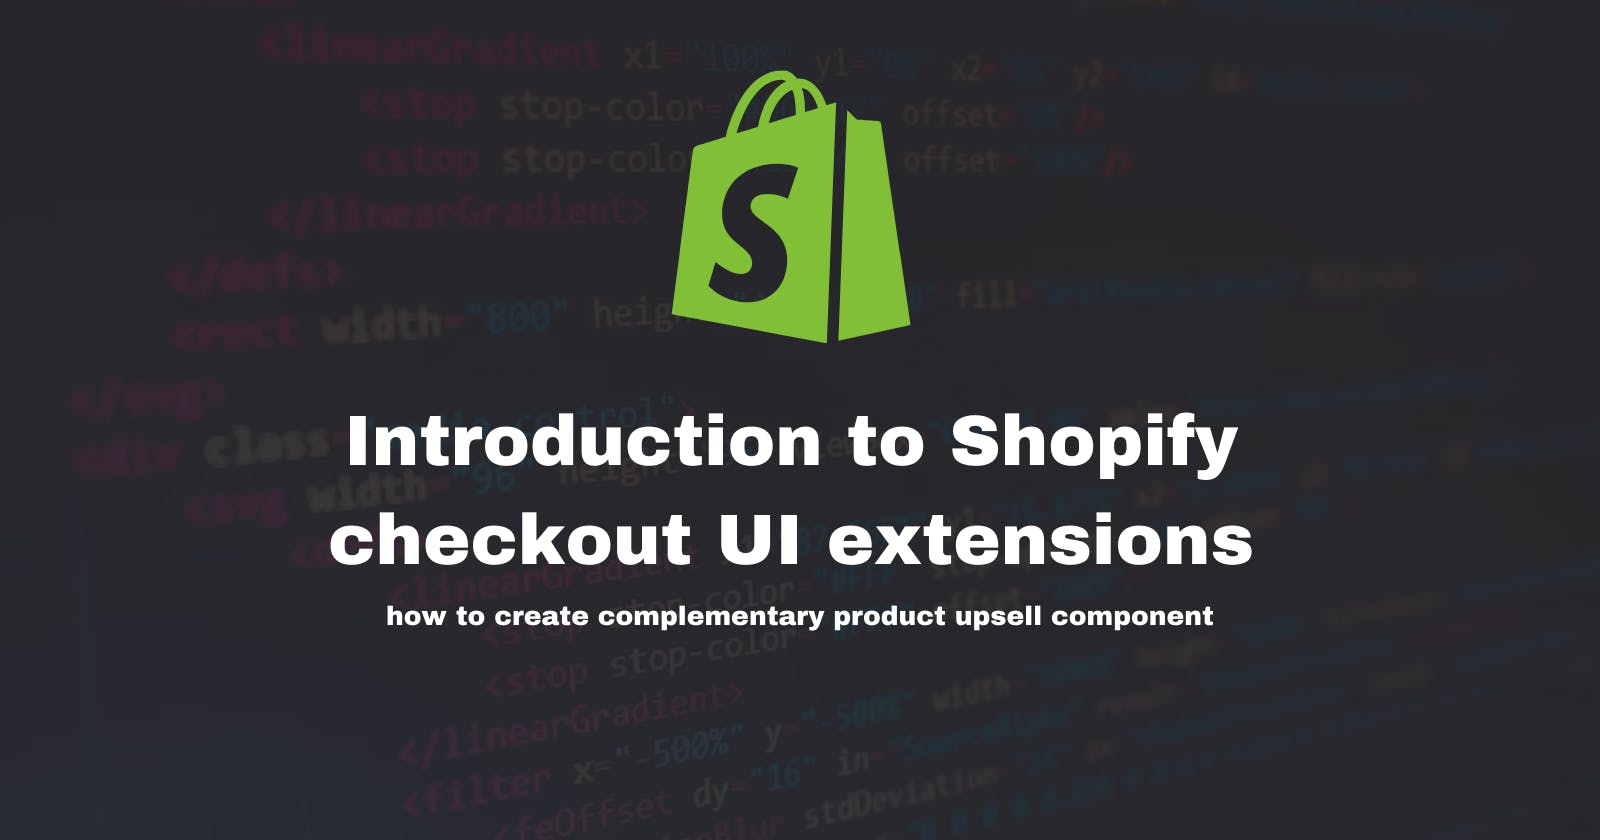 Introduction to Shopify checkout UI extensions - how to create complementary product upsell component